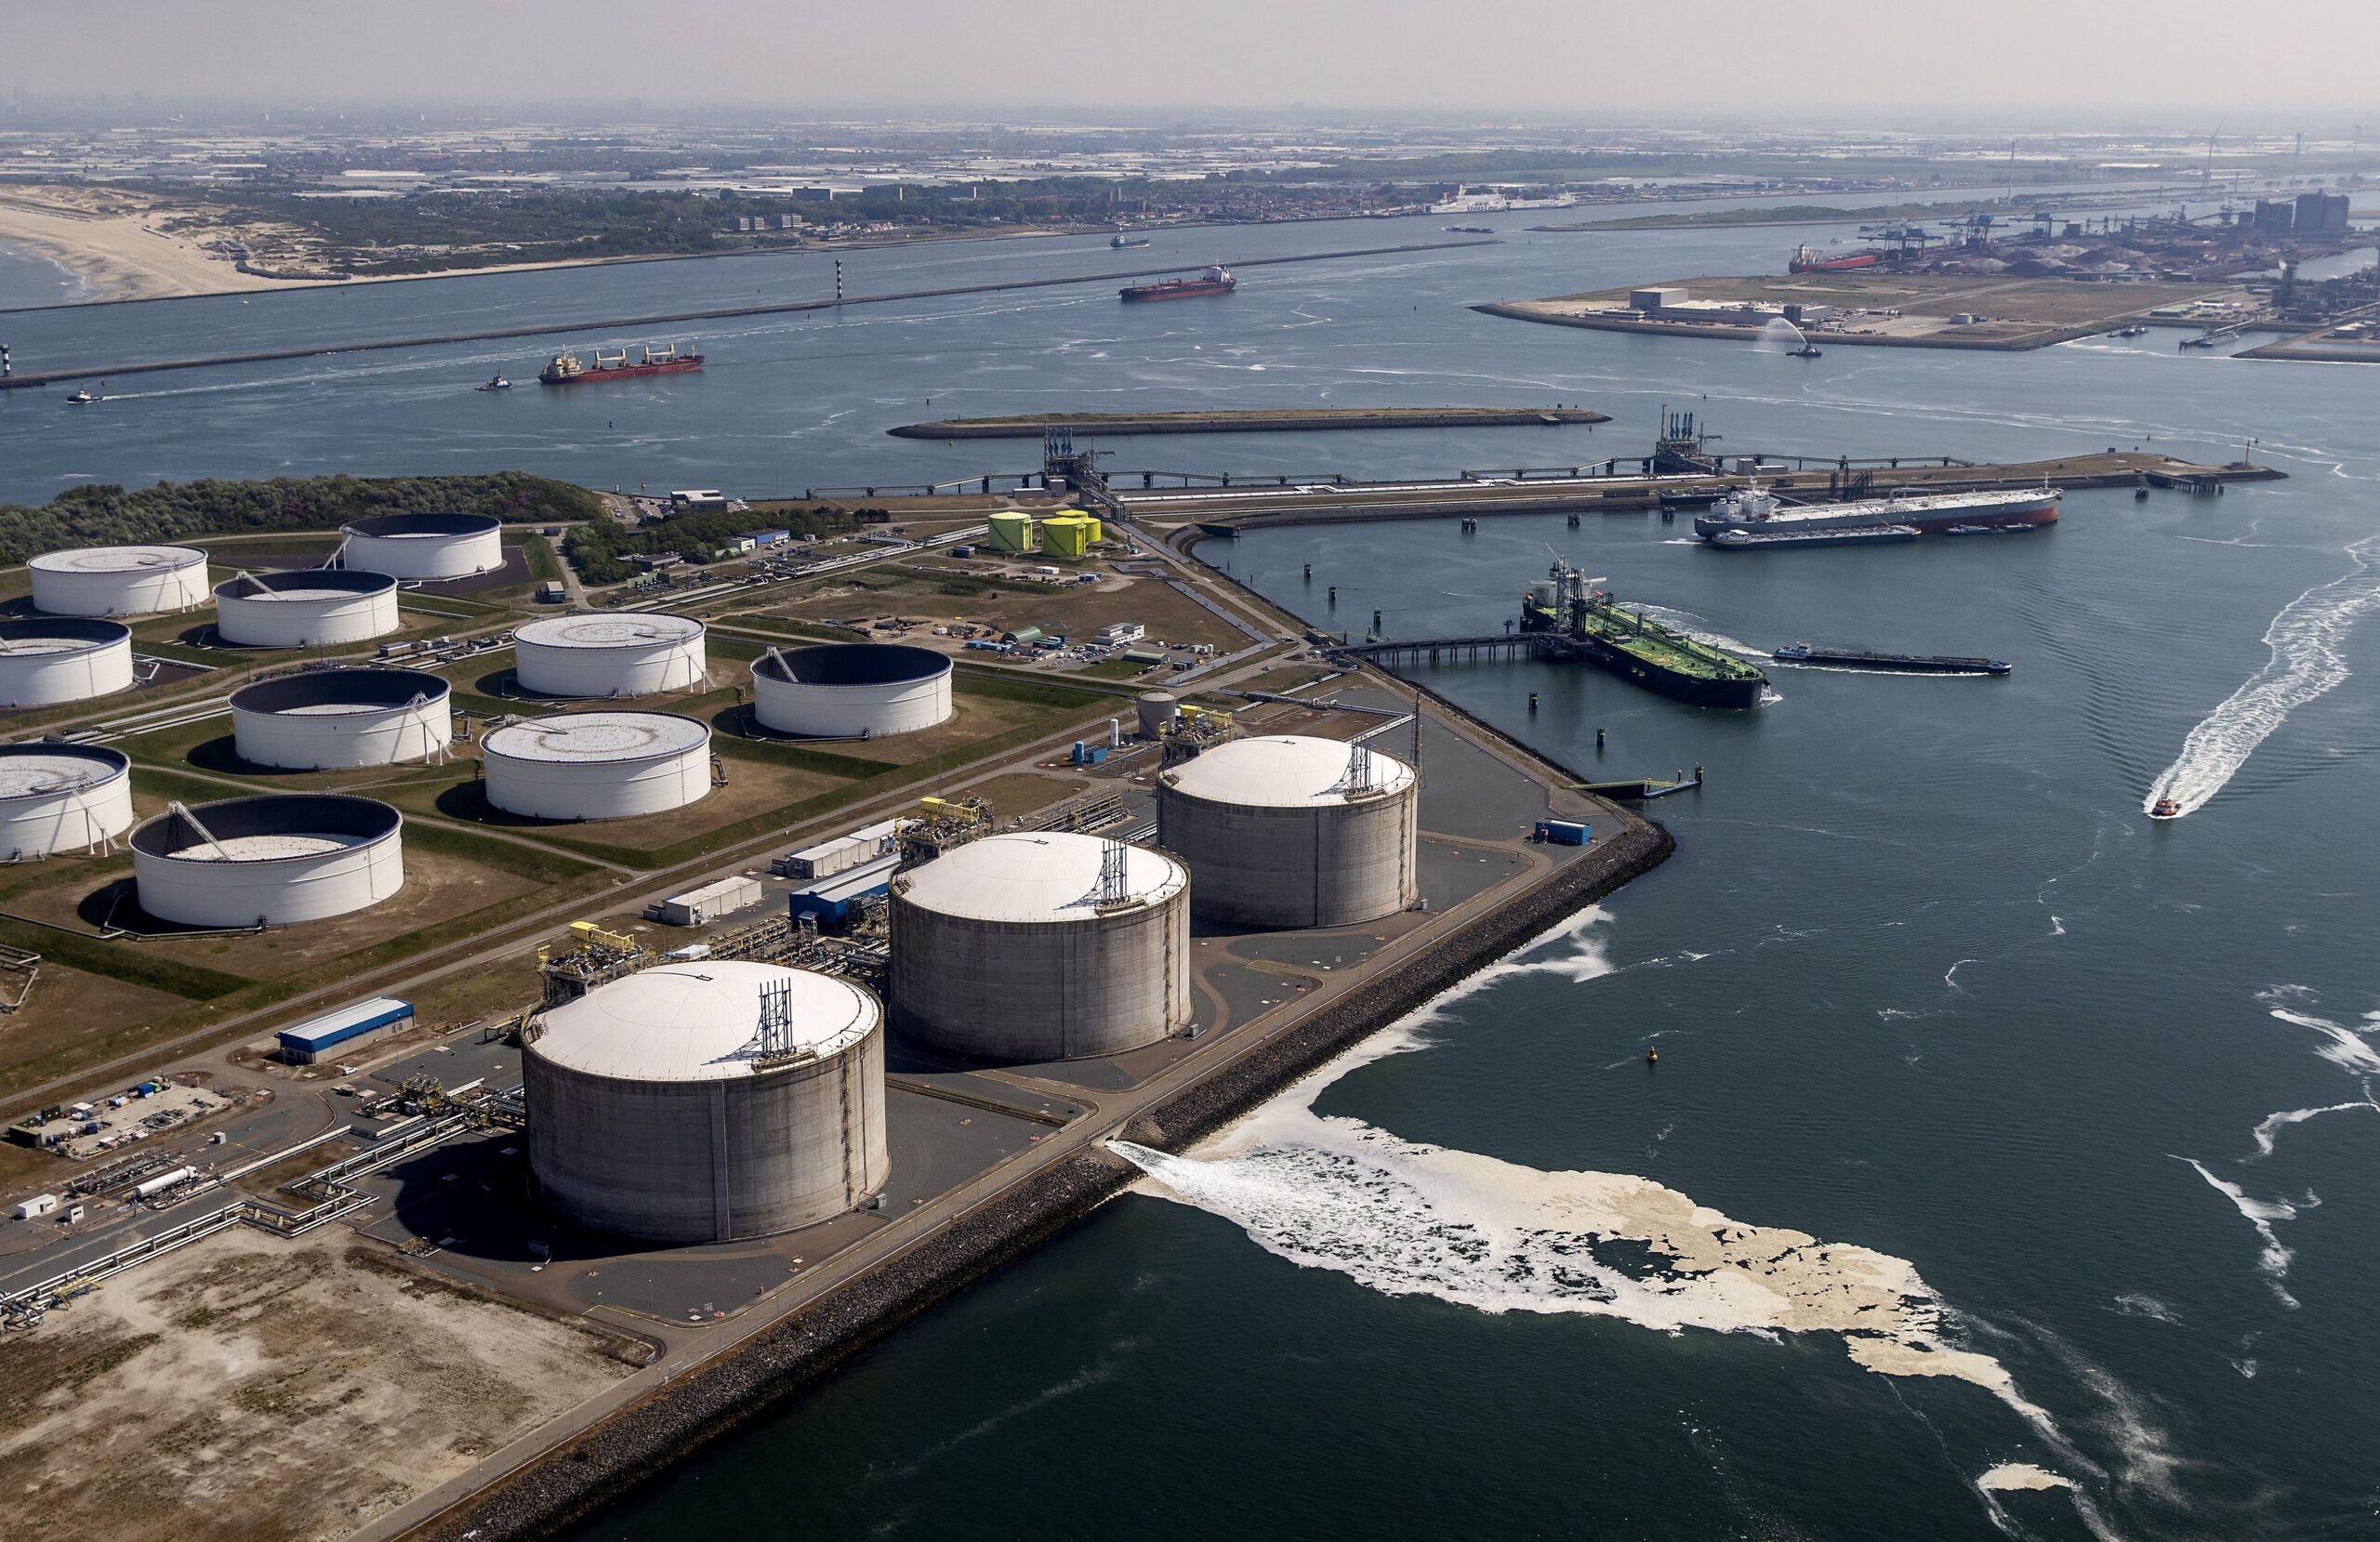 This aerial view shows the Liquid Natural Gas (LNG) terminal on the Maasvlakte in Rotterdam, on May 6, 2022. – – Netherlands OUT (Photo by Koen van Weel / ANP / AFP) / Netherlands OUT (Photo by KOEN VAN WEEL/ANP/AFP via Getty Images) 